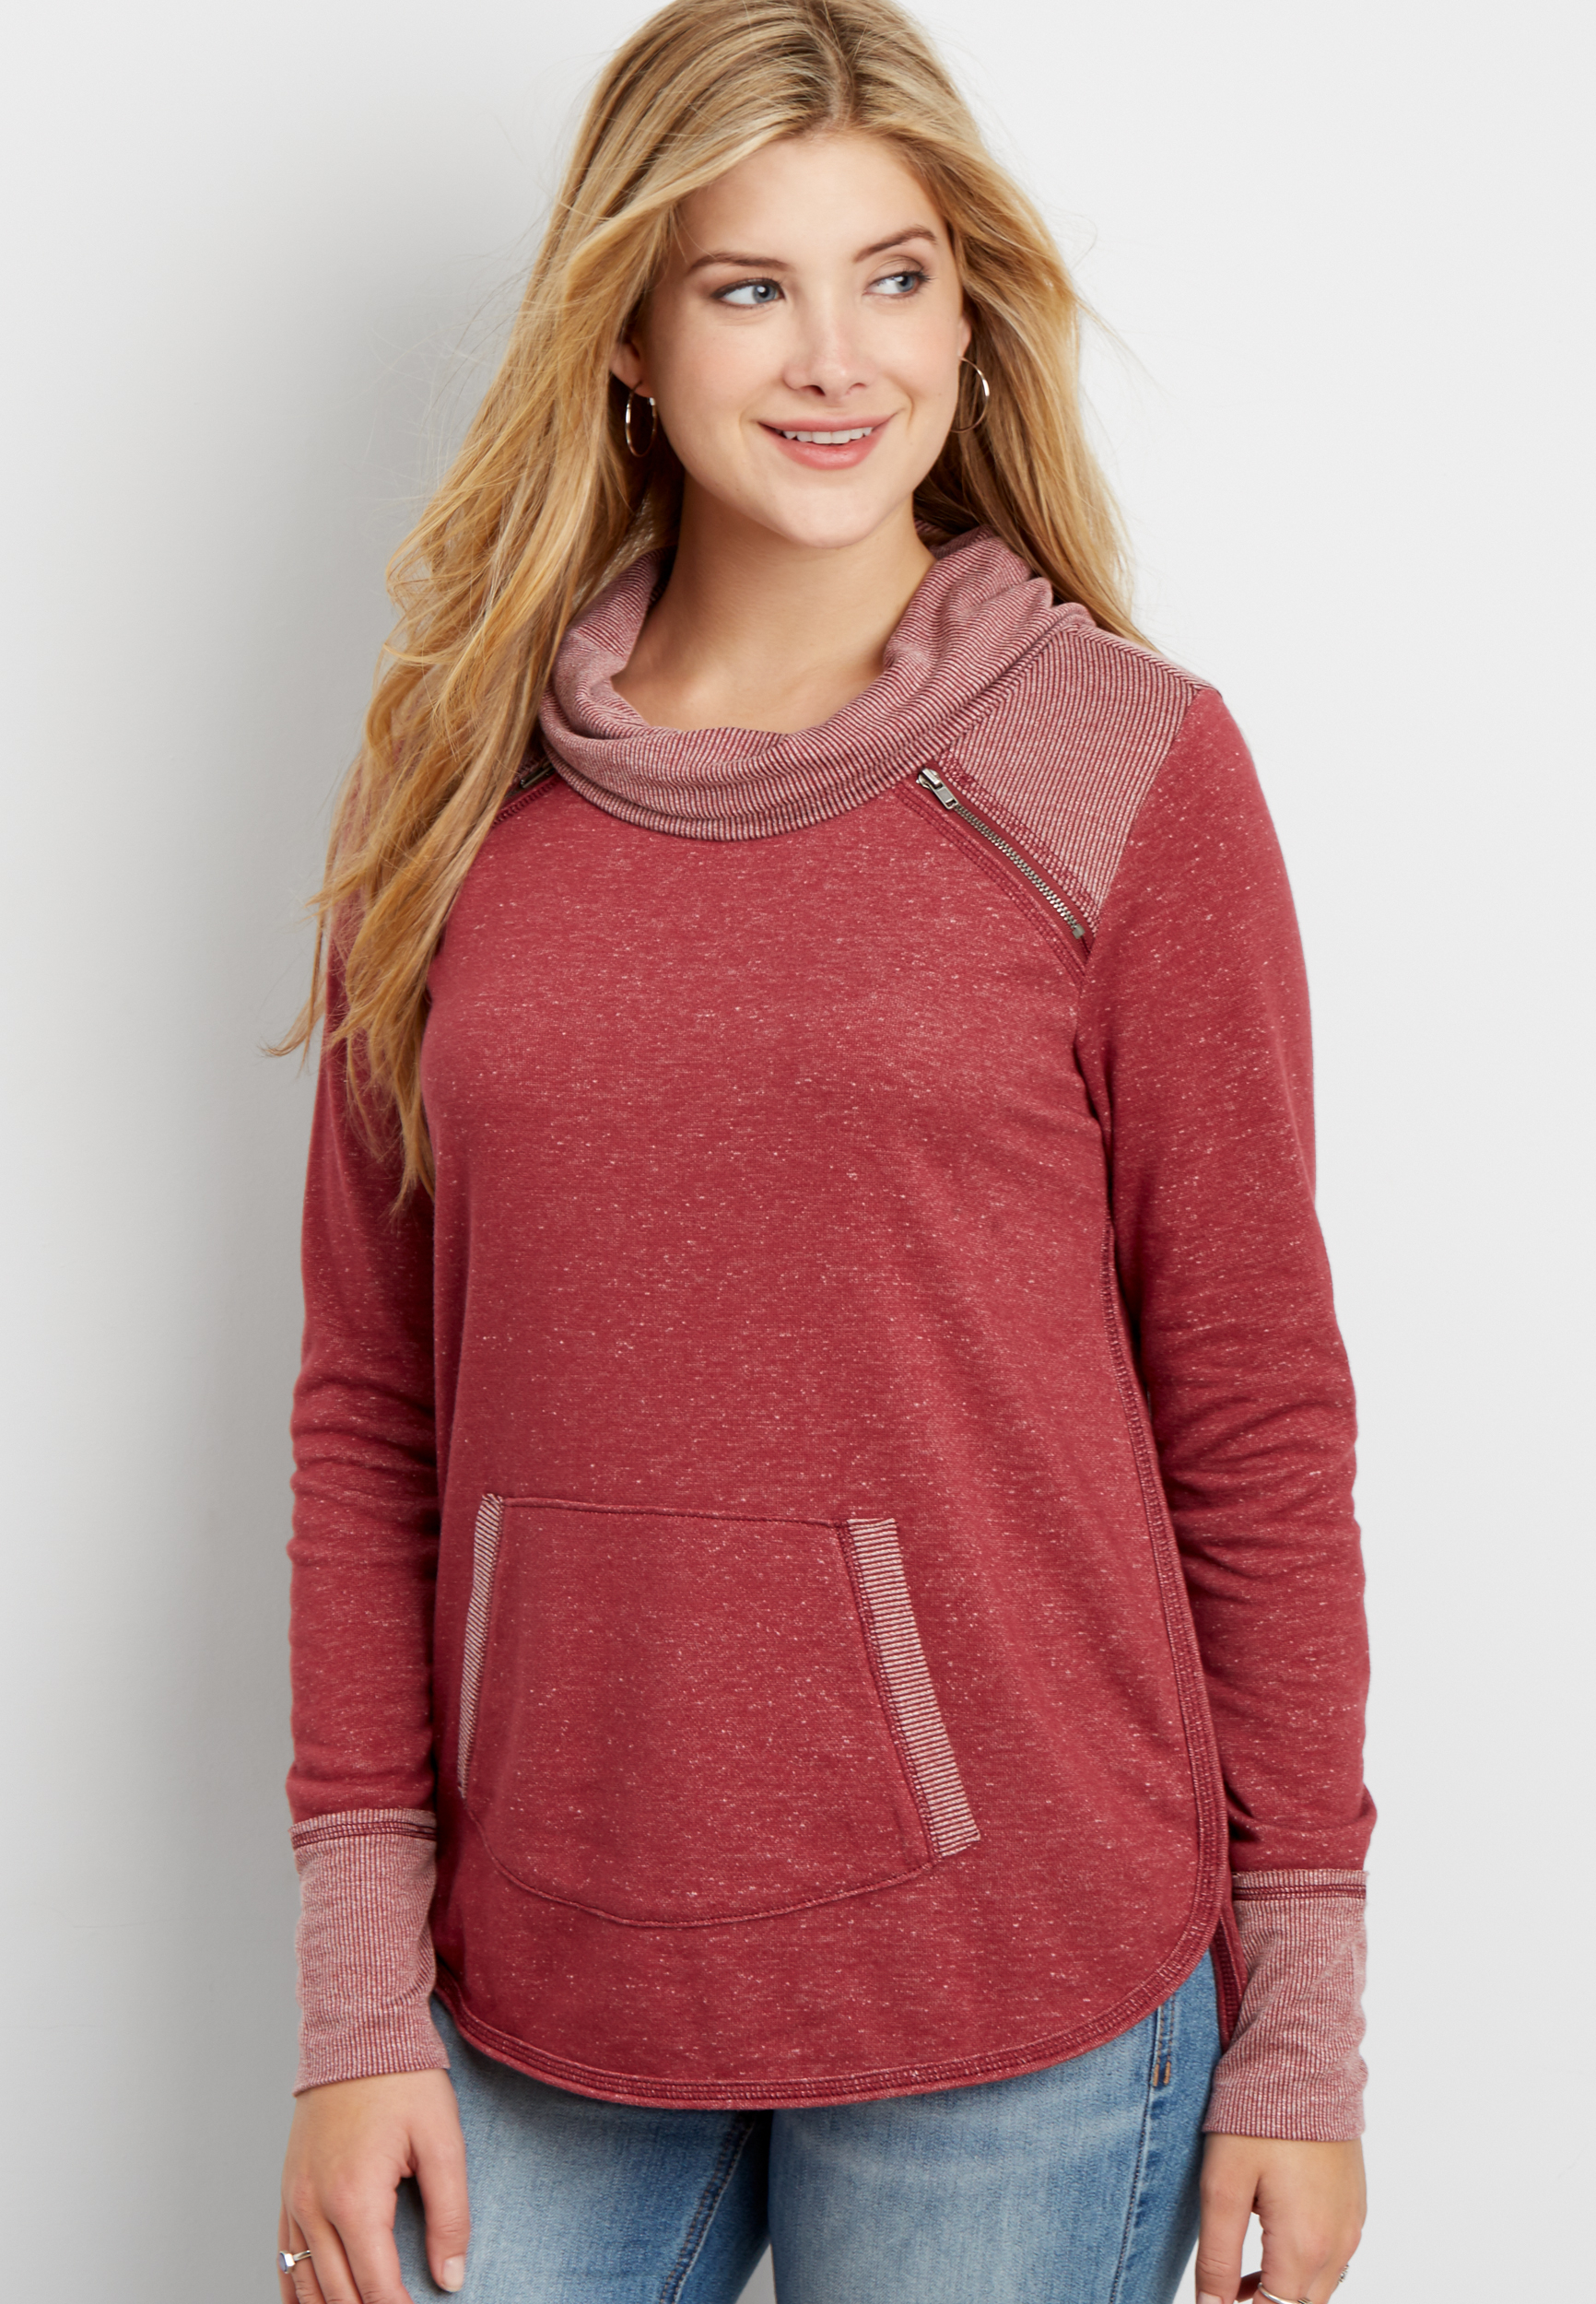 pullover cowl neck sweatshirt with zippers | maurices